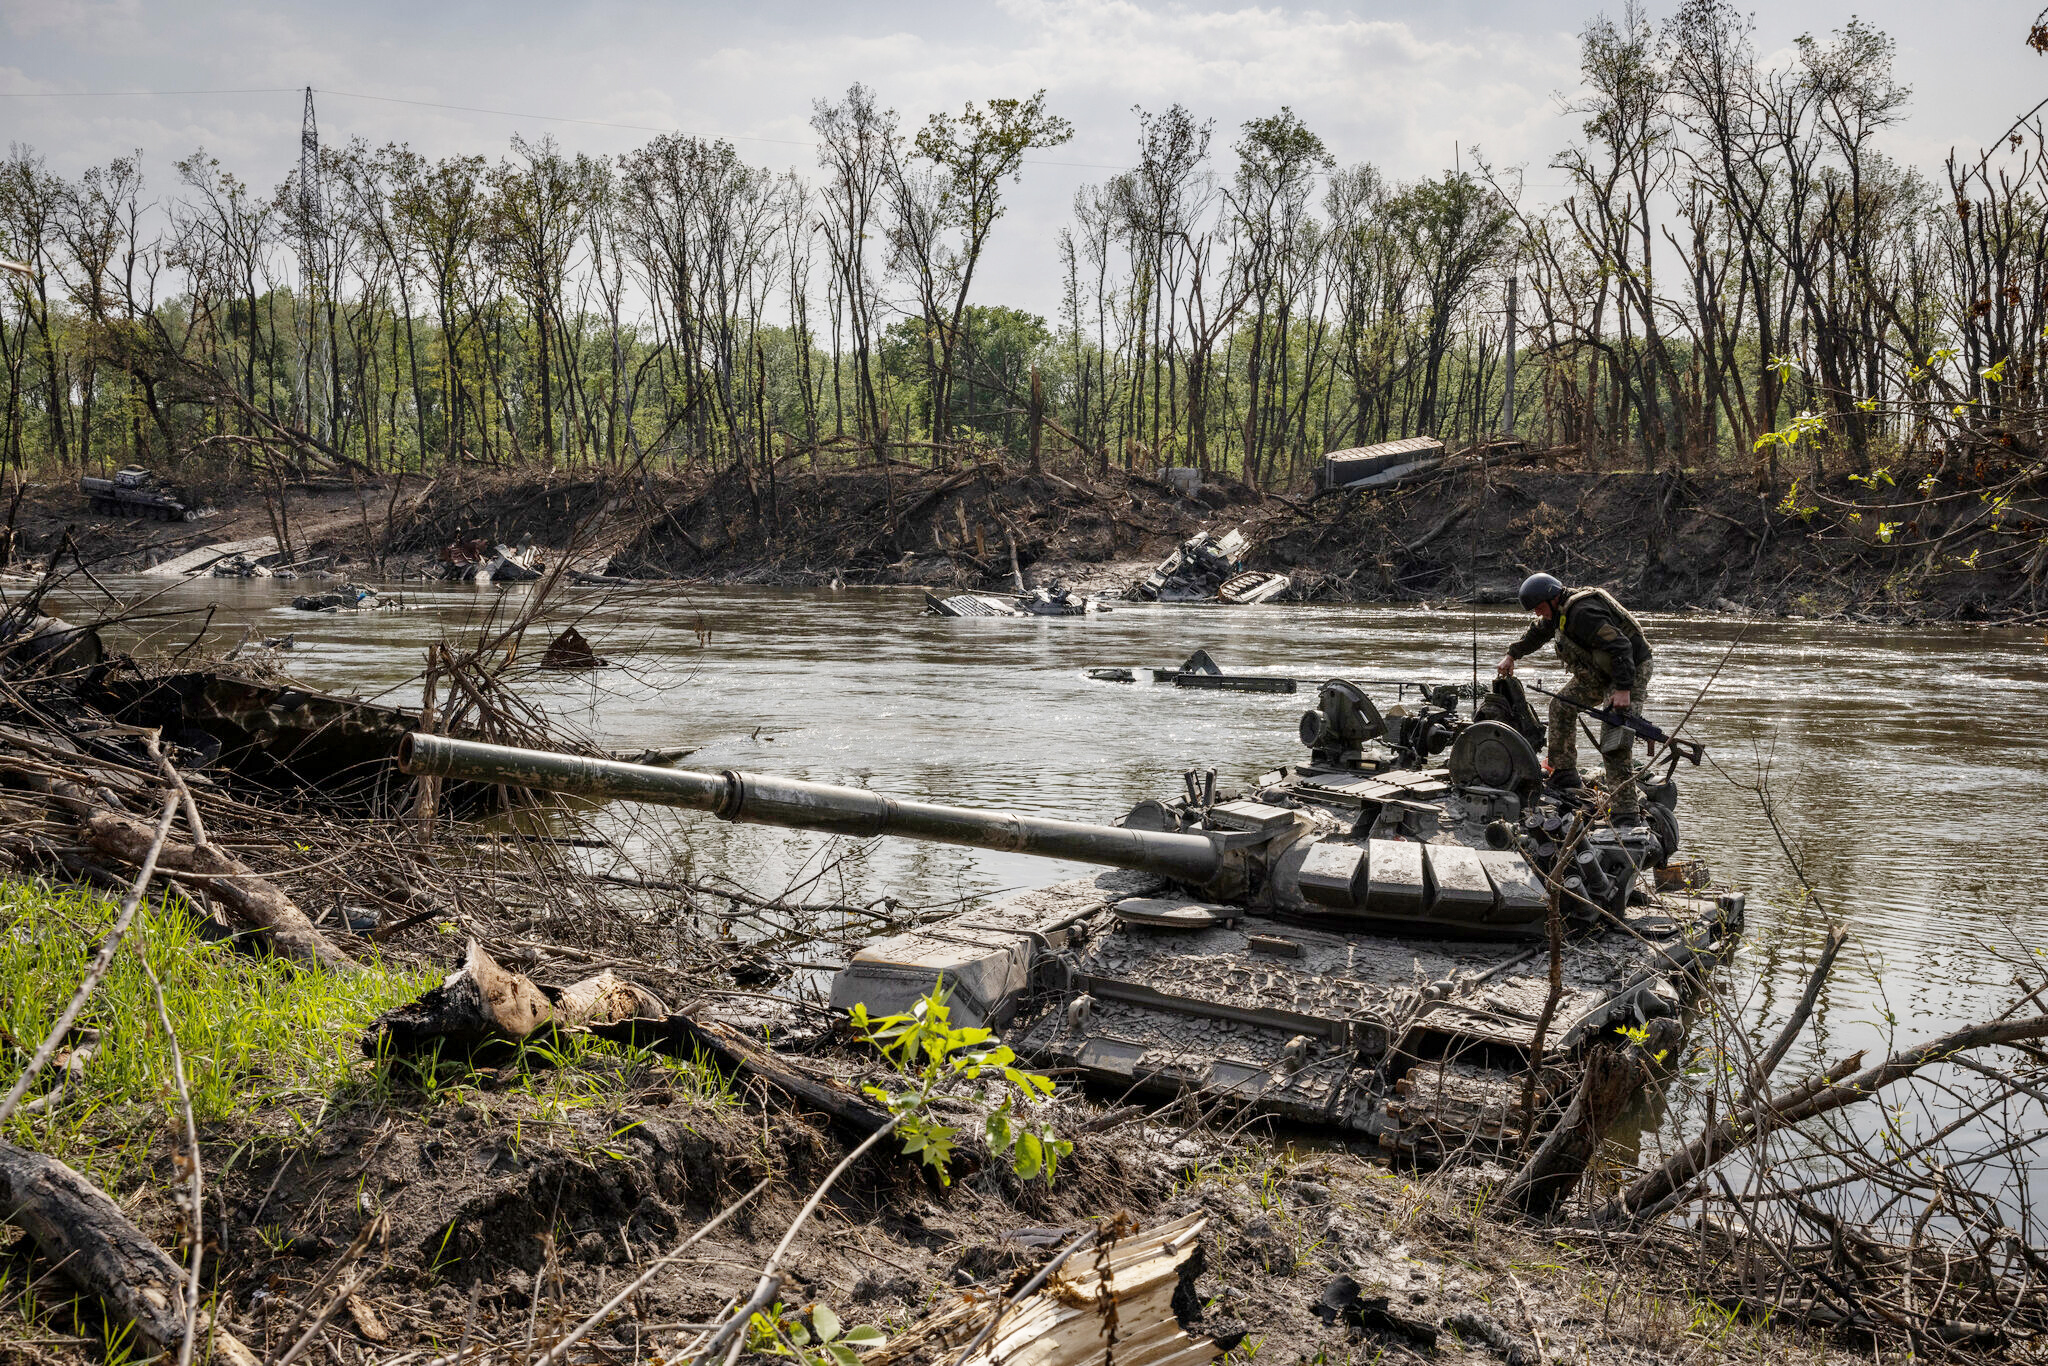 A Ukrainian soldier atop an abandoned Russian tank in the Seversky Donets river in order to salvage a heavy machine gun left behind. Image courtesy of The New York Times 